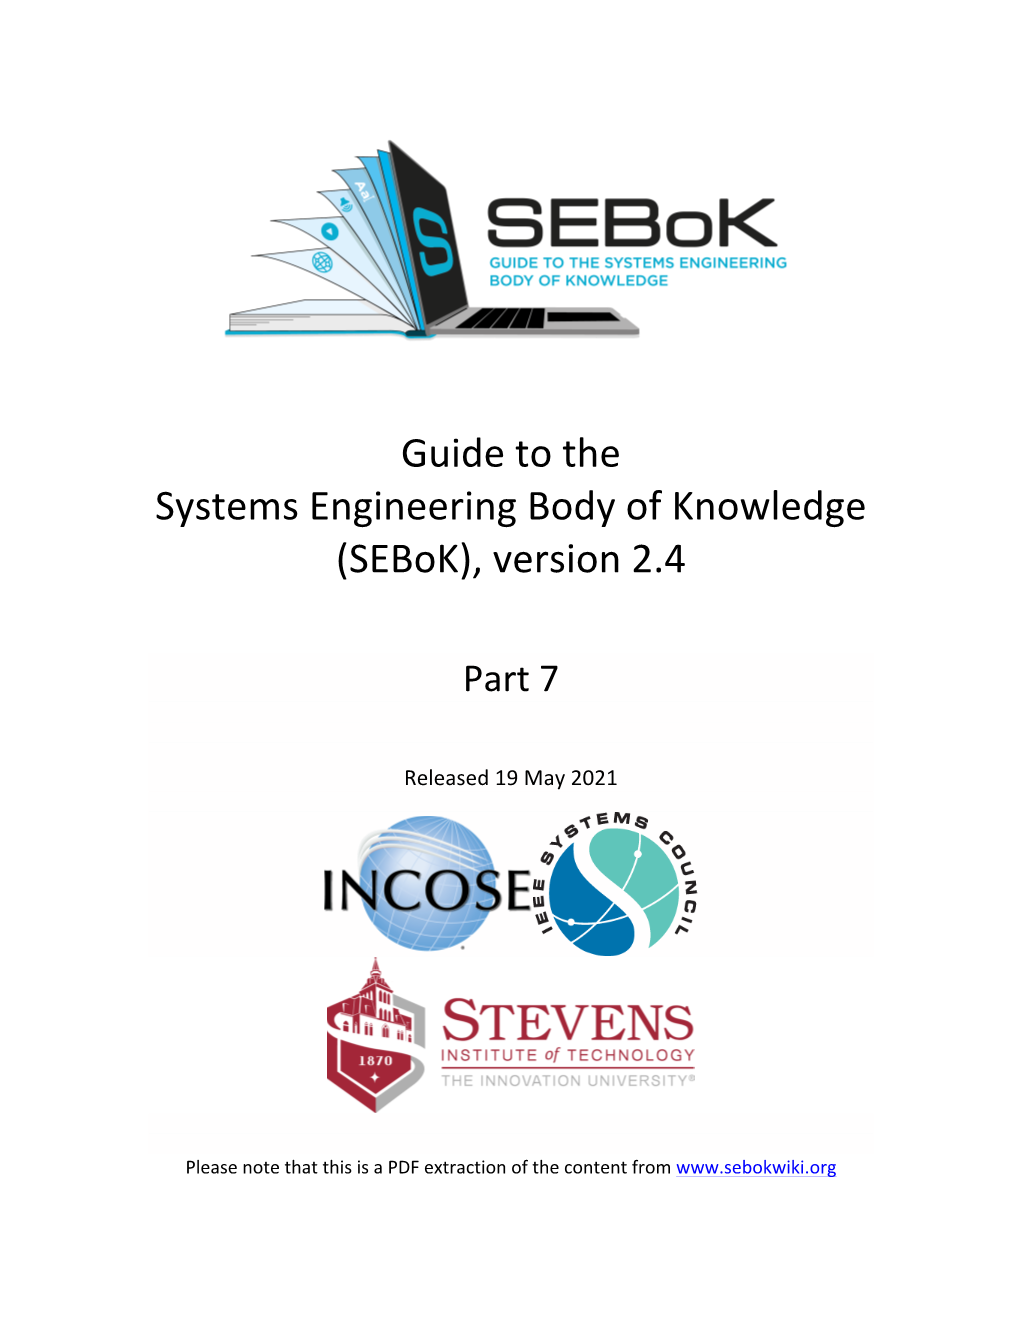 Guide to the Systems Engineering Body of Knowledge (Sebok), Version 2.4